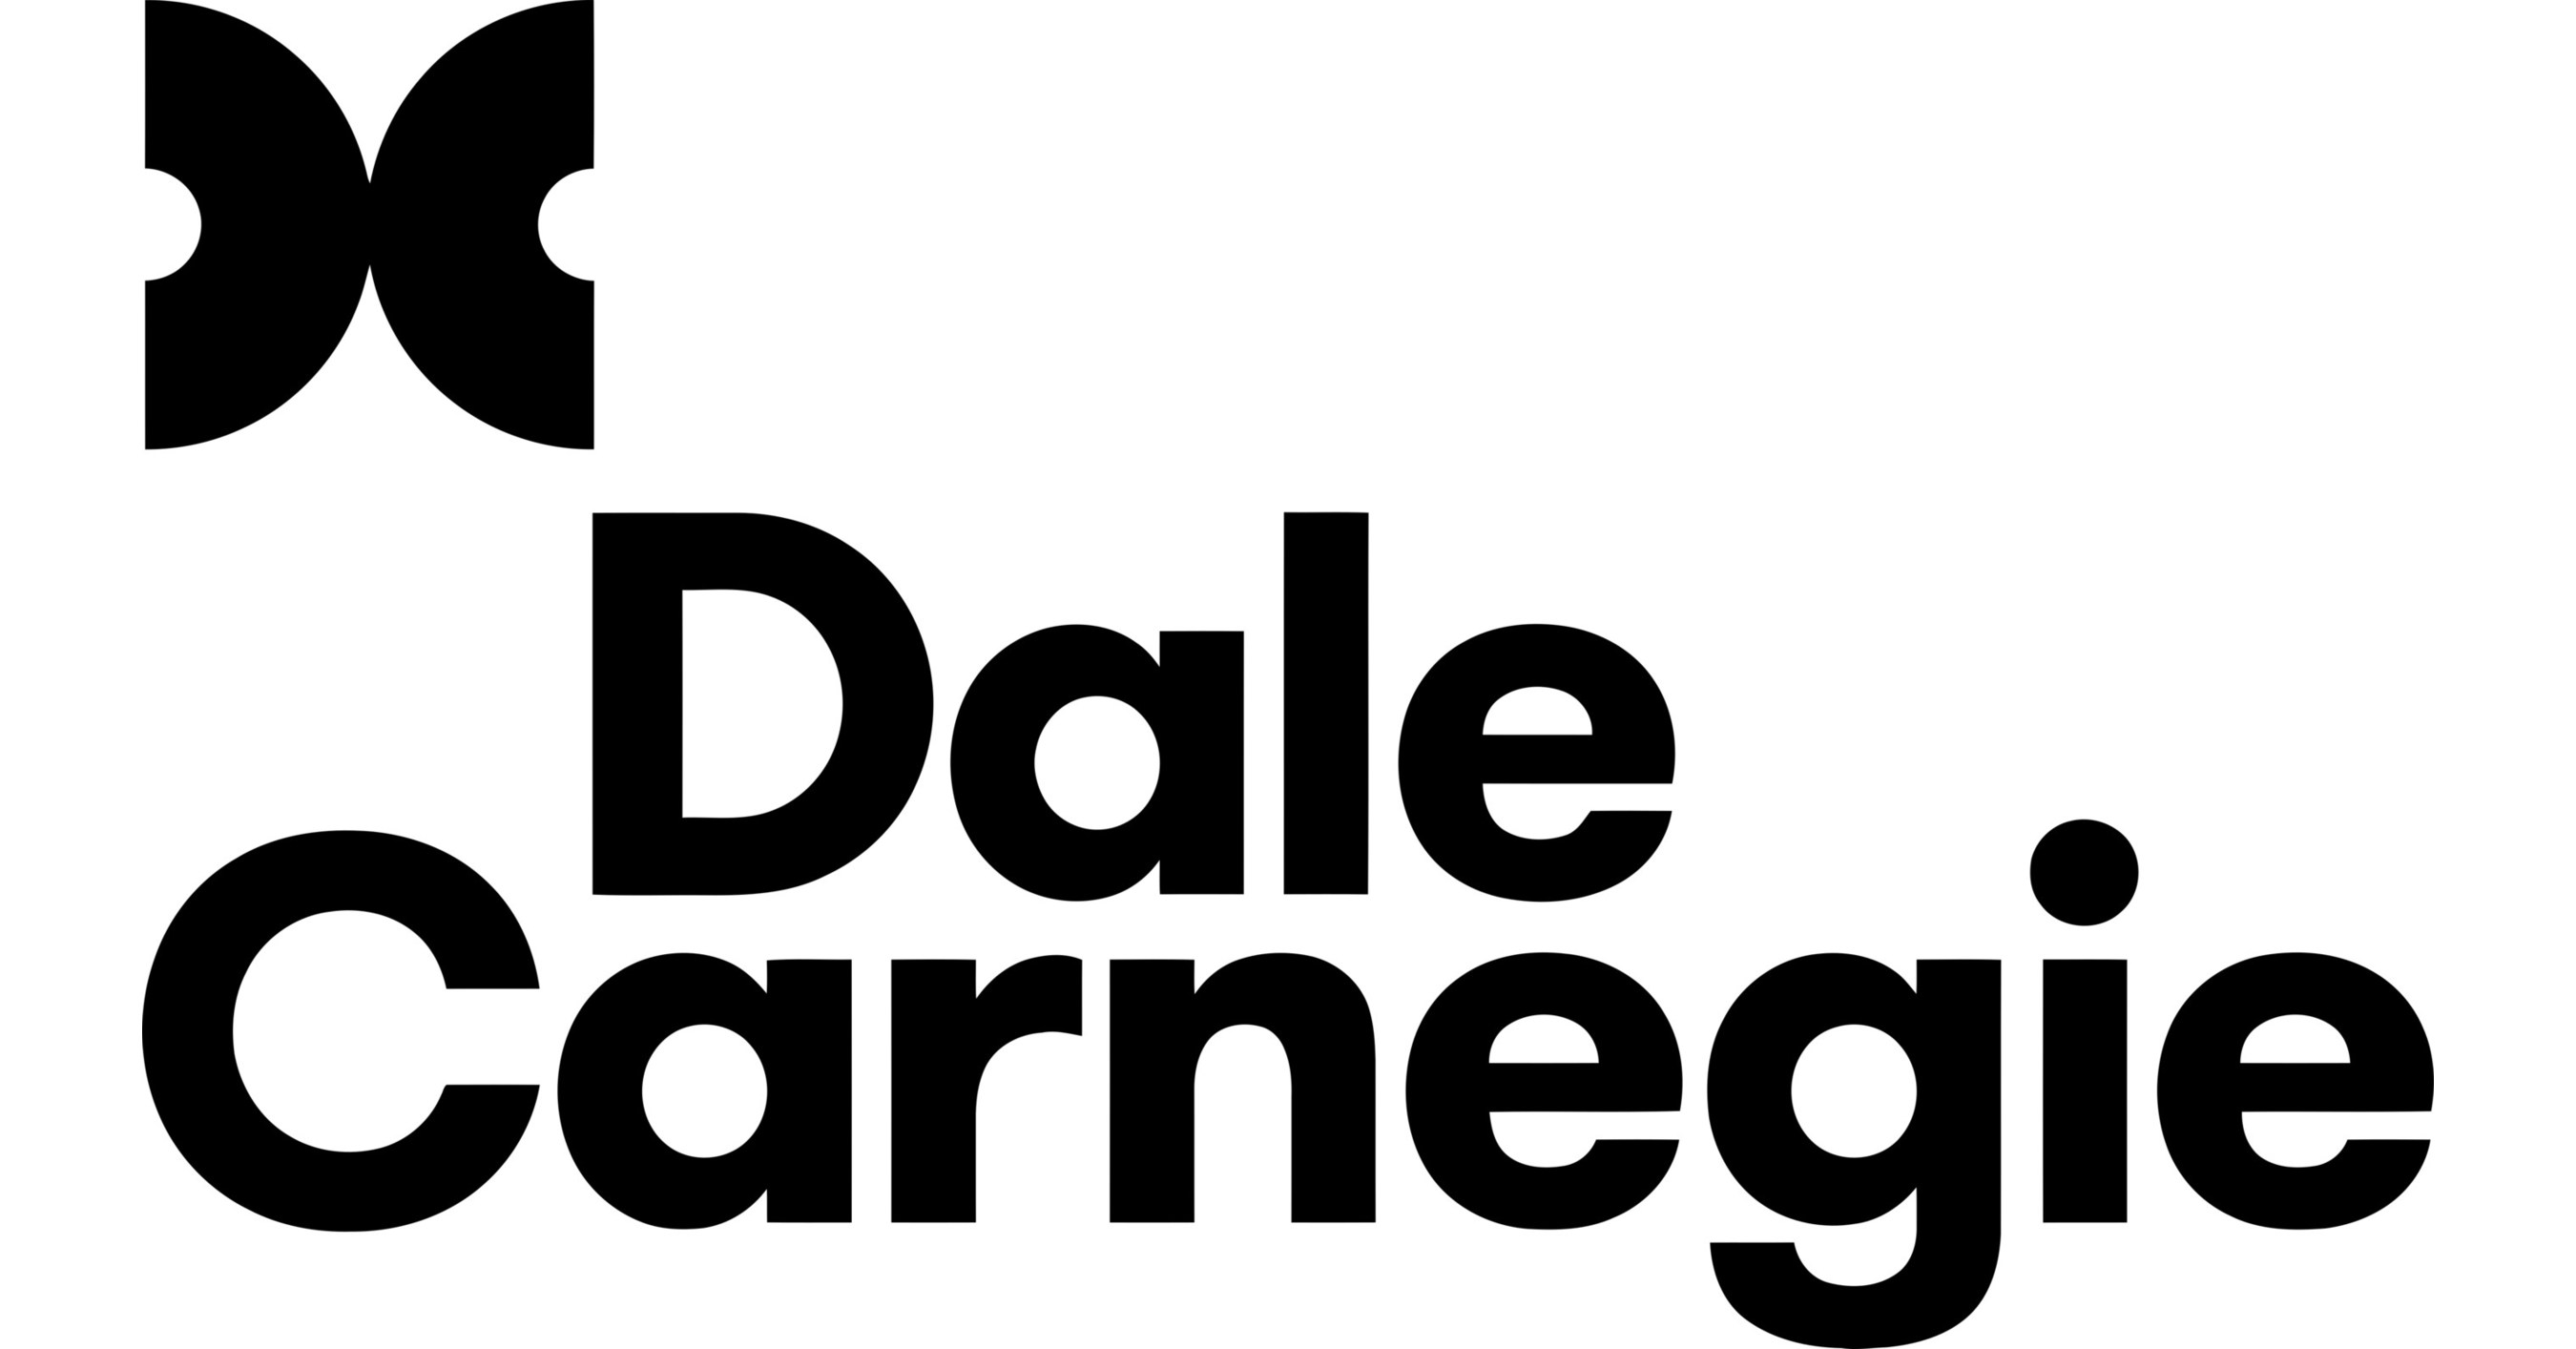 Dale Carnegie and Associates Releases New Study